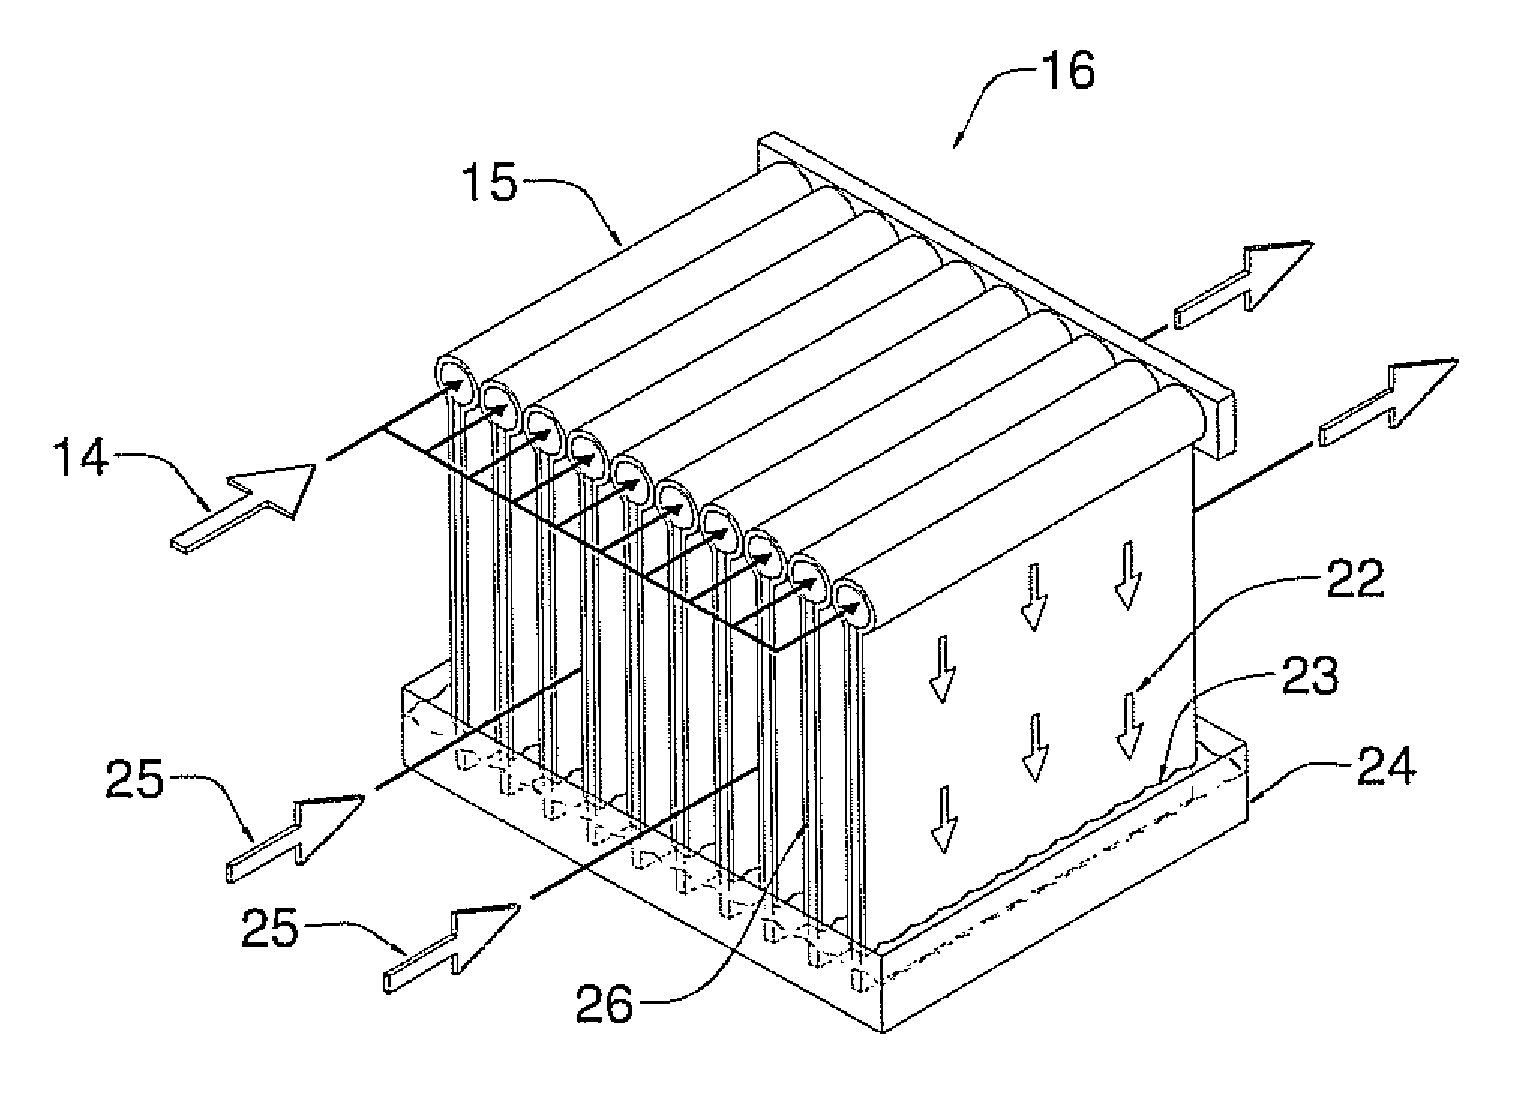 Heat dissipation system with hygroscopic working fluid